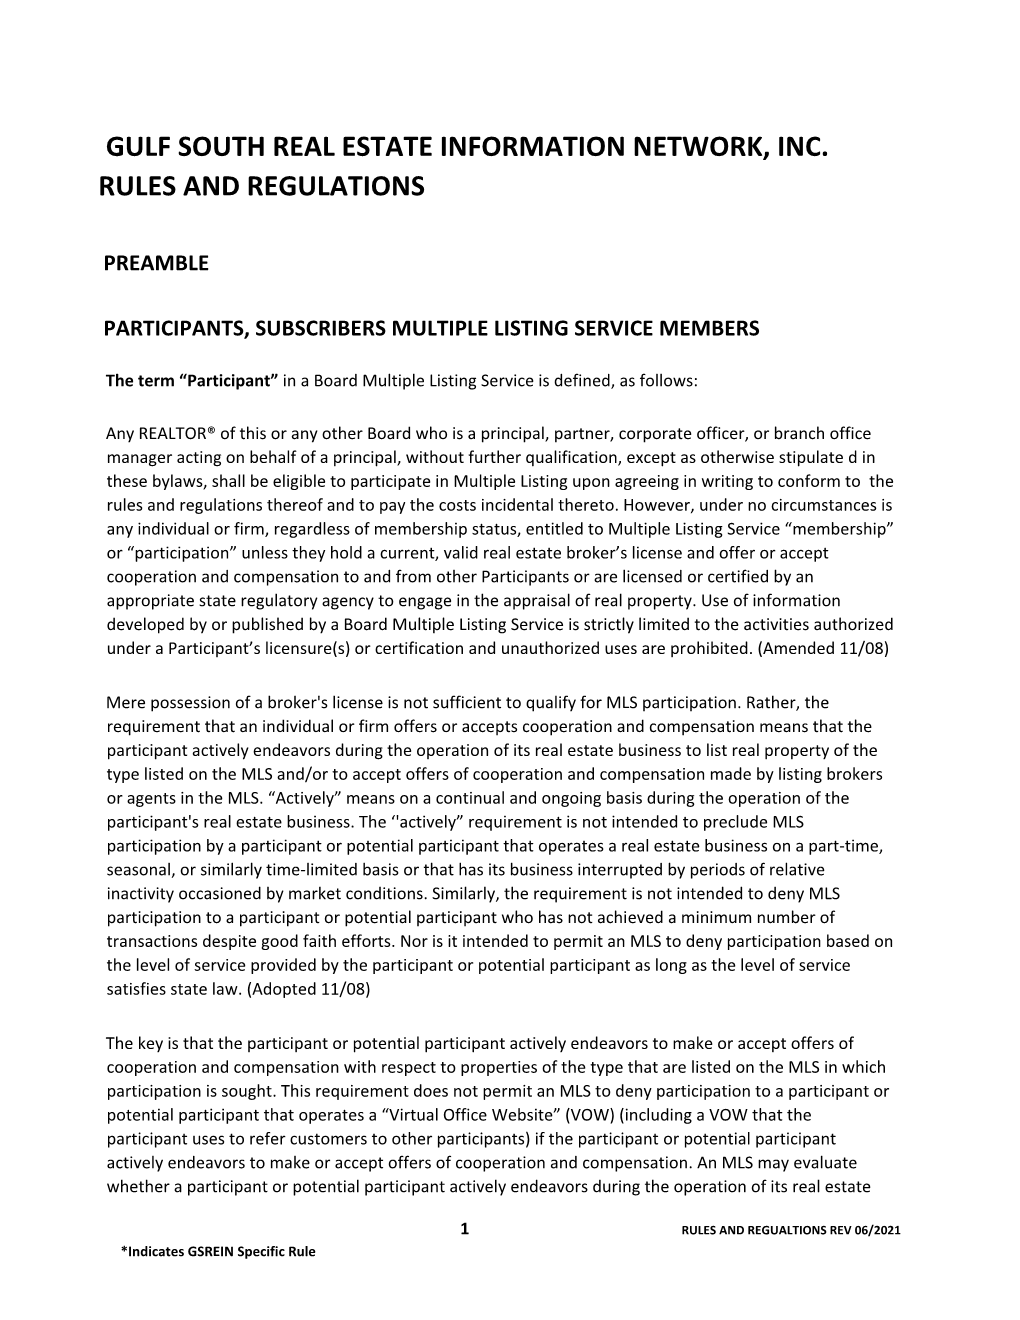 MLS Rules and Regulations